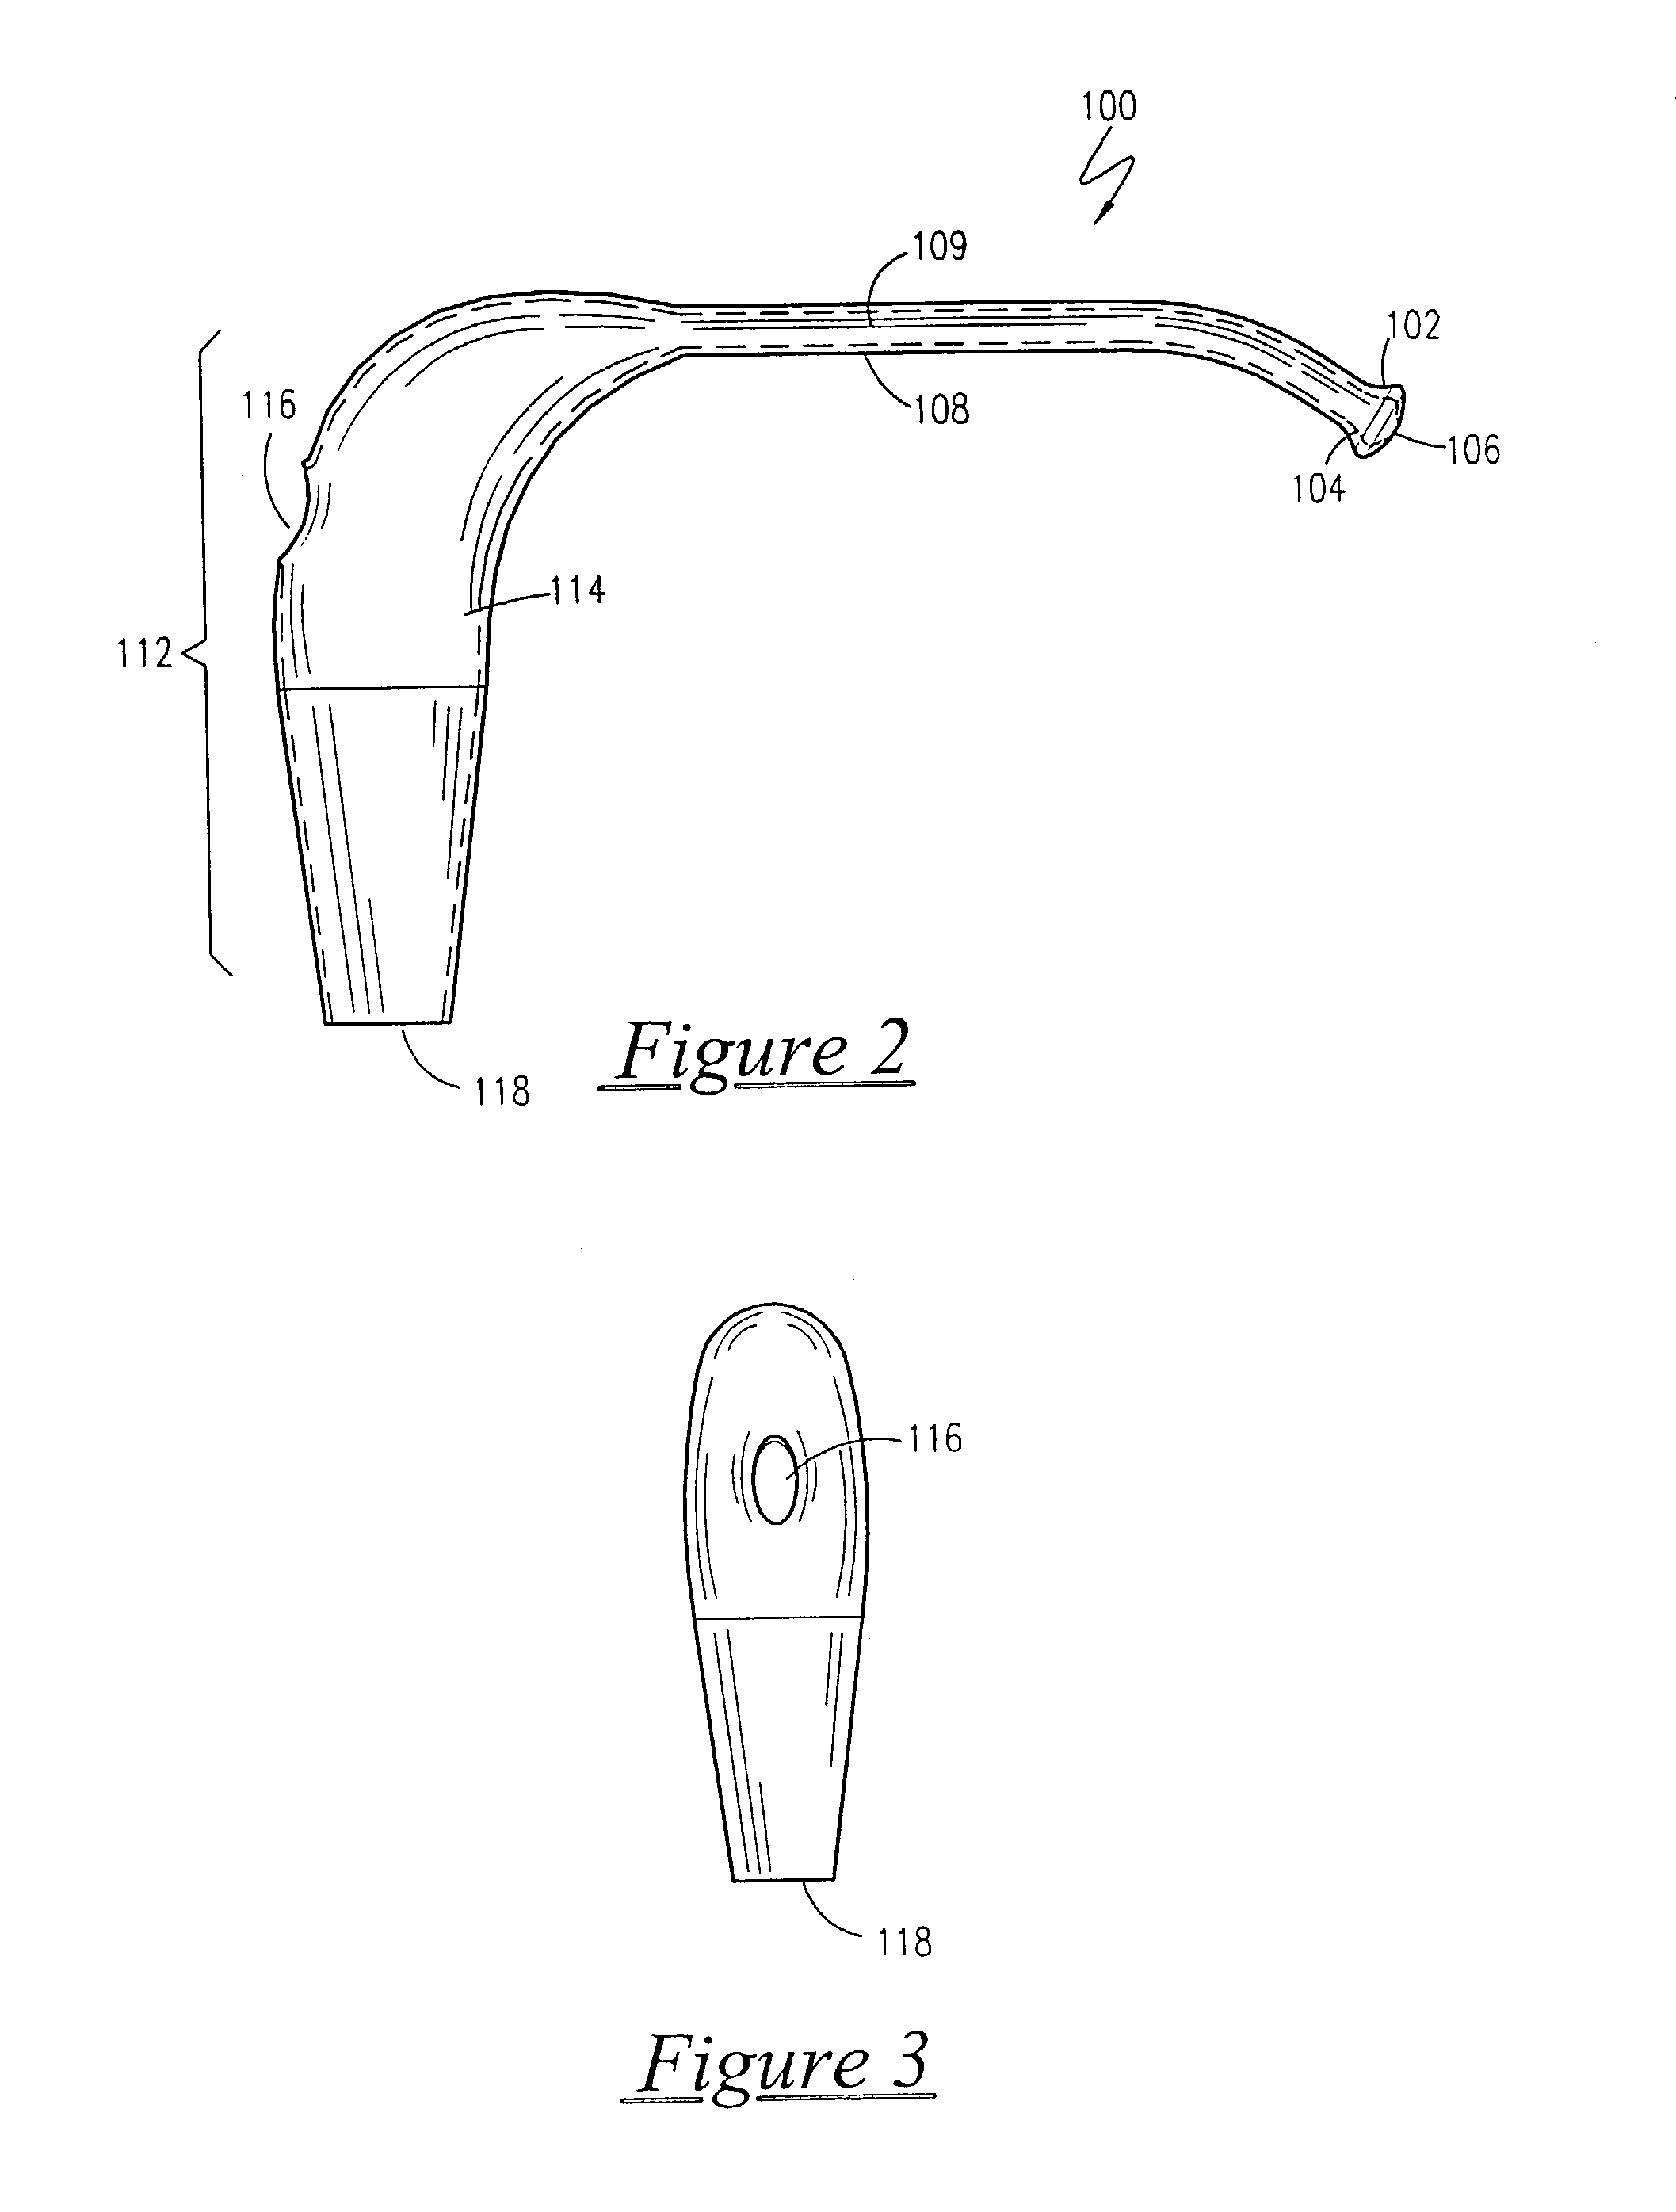 Human airway clearing tool